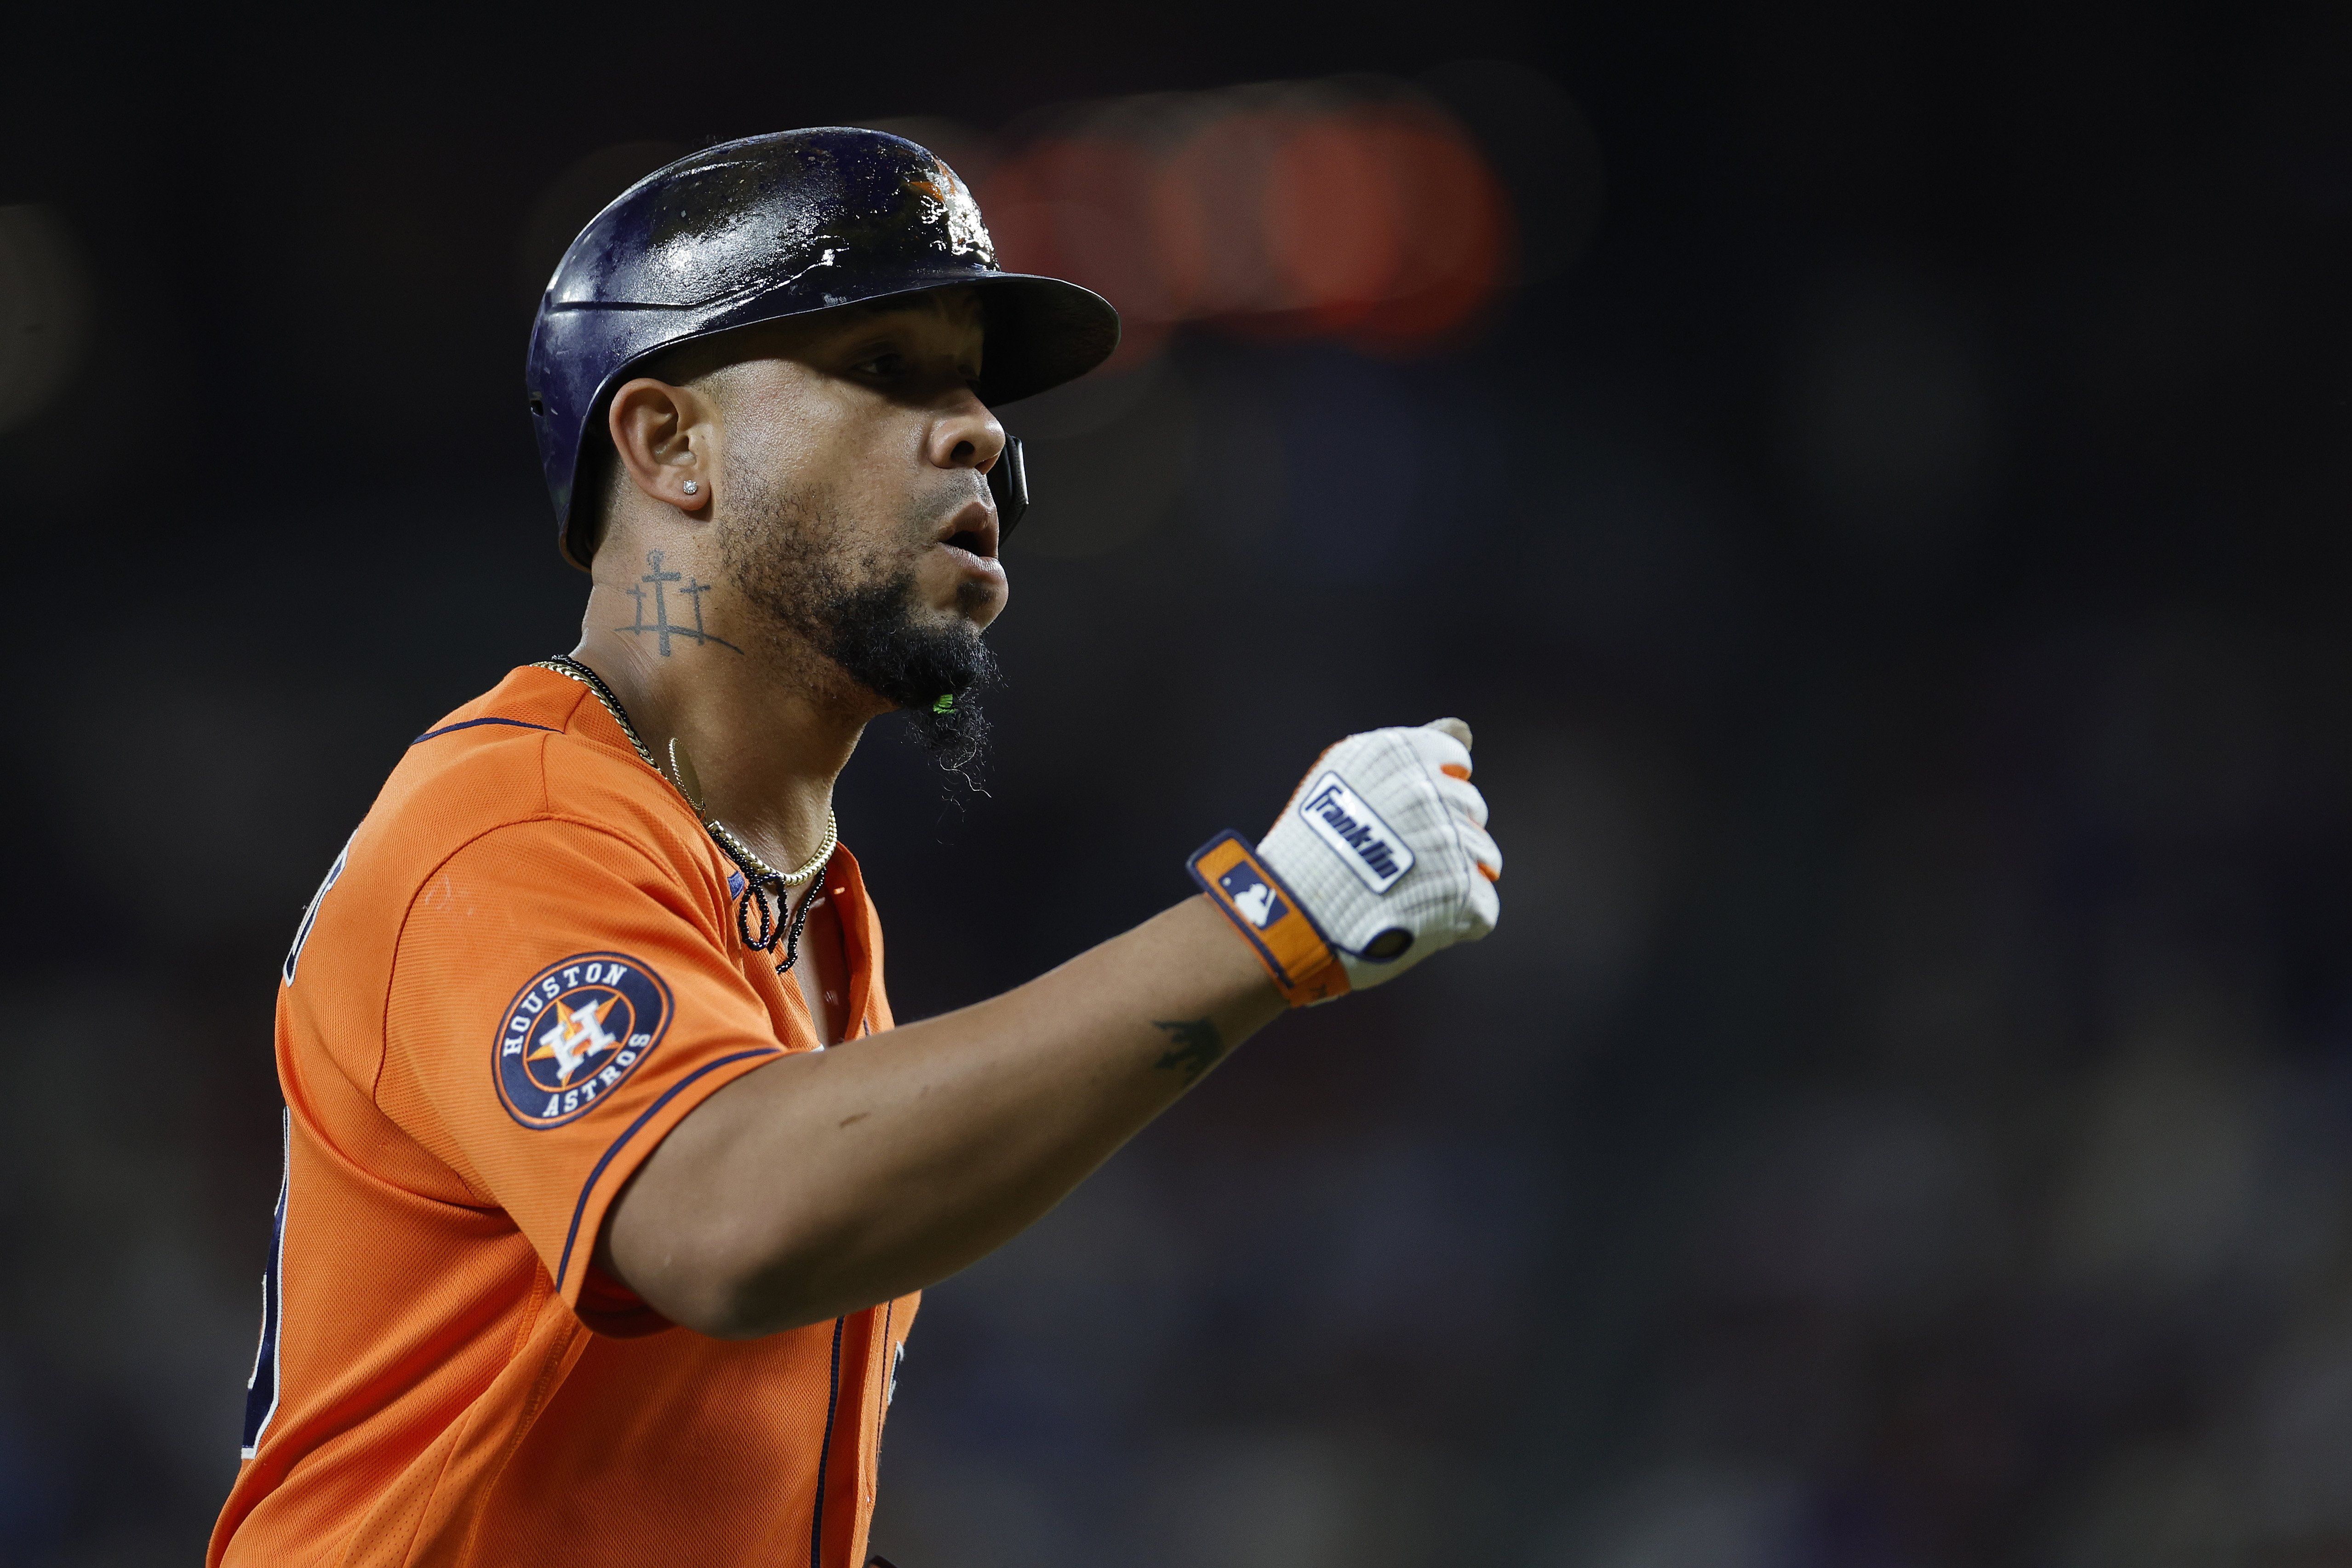 Astros pull even in ALCS with 10-3 win over Rangers